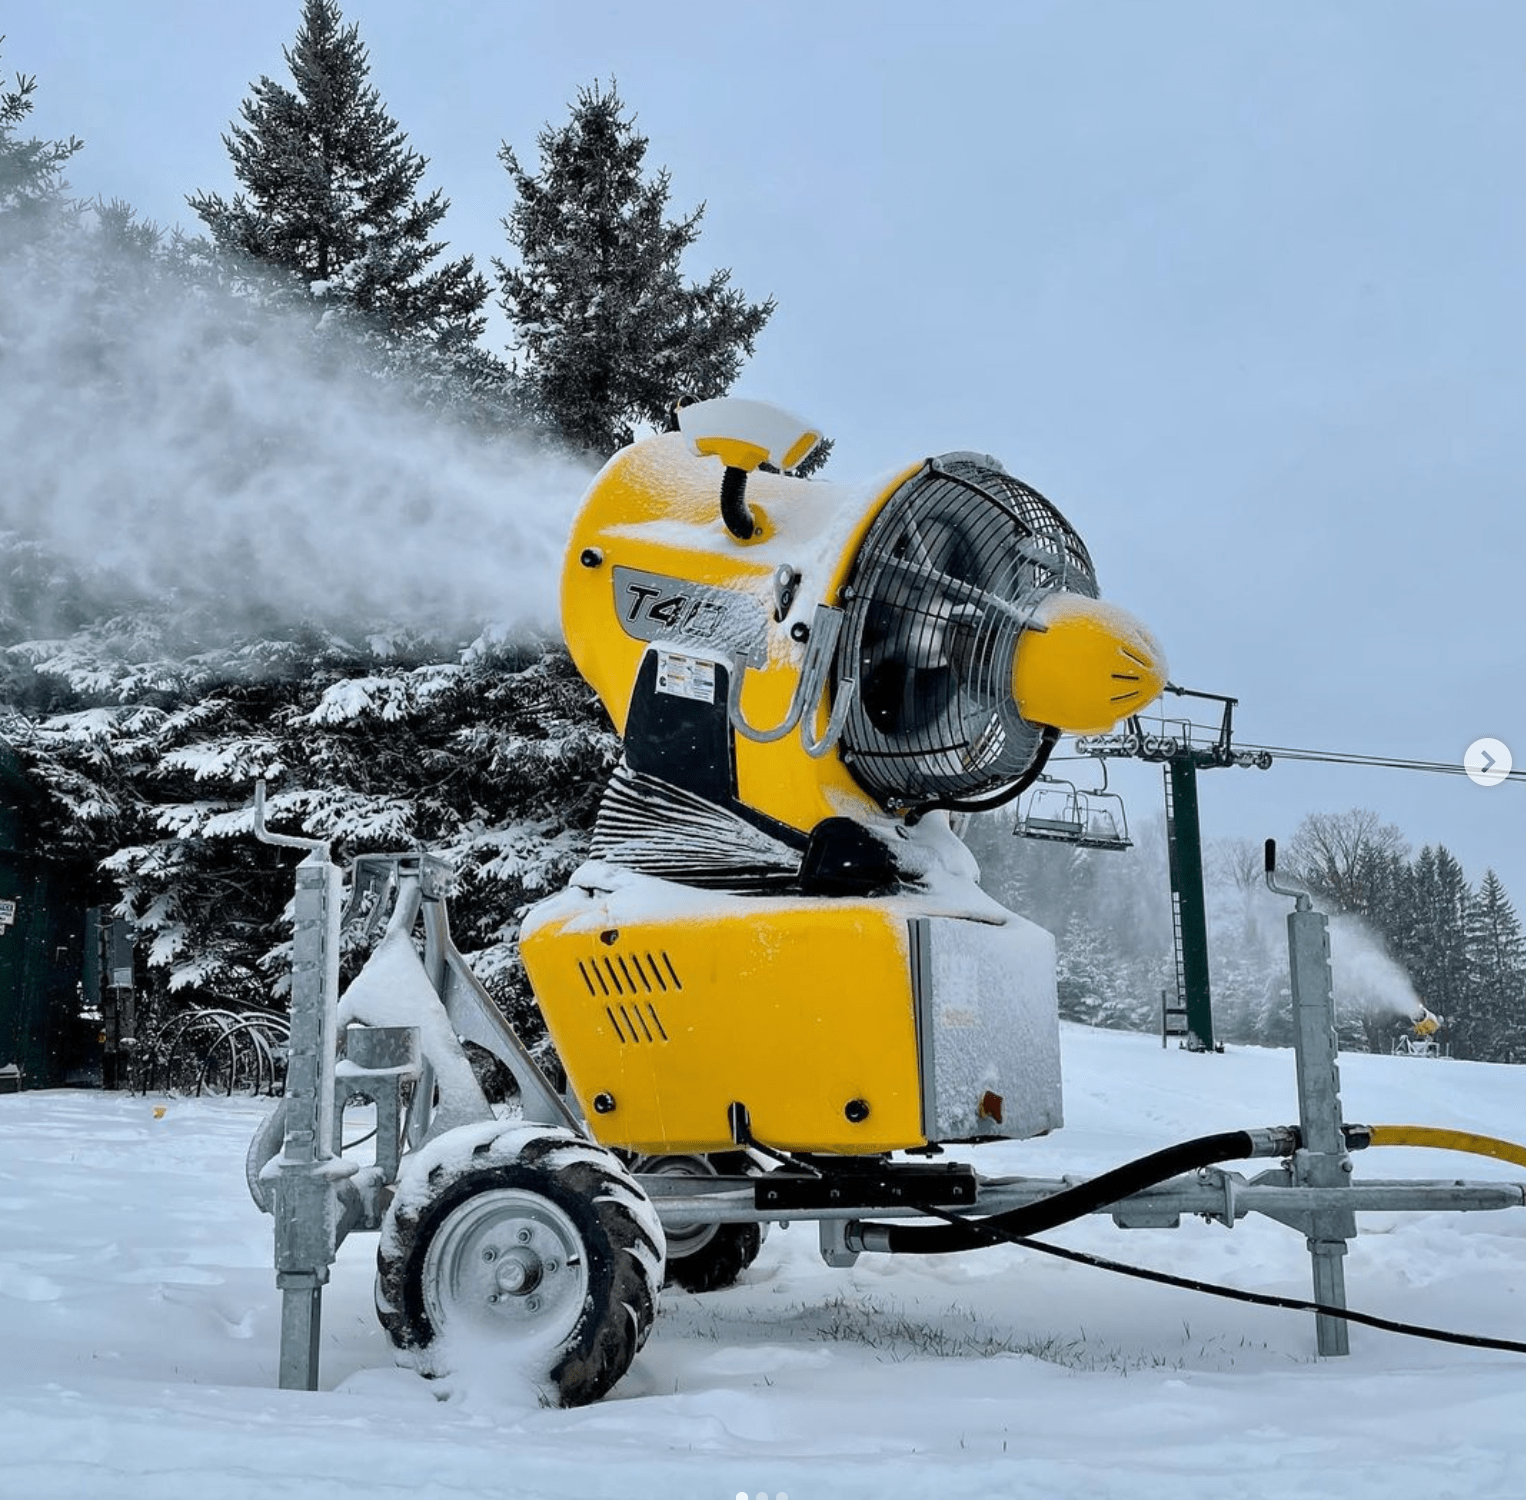 Private club snow blowers